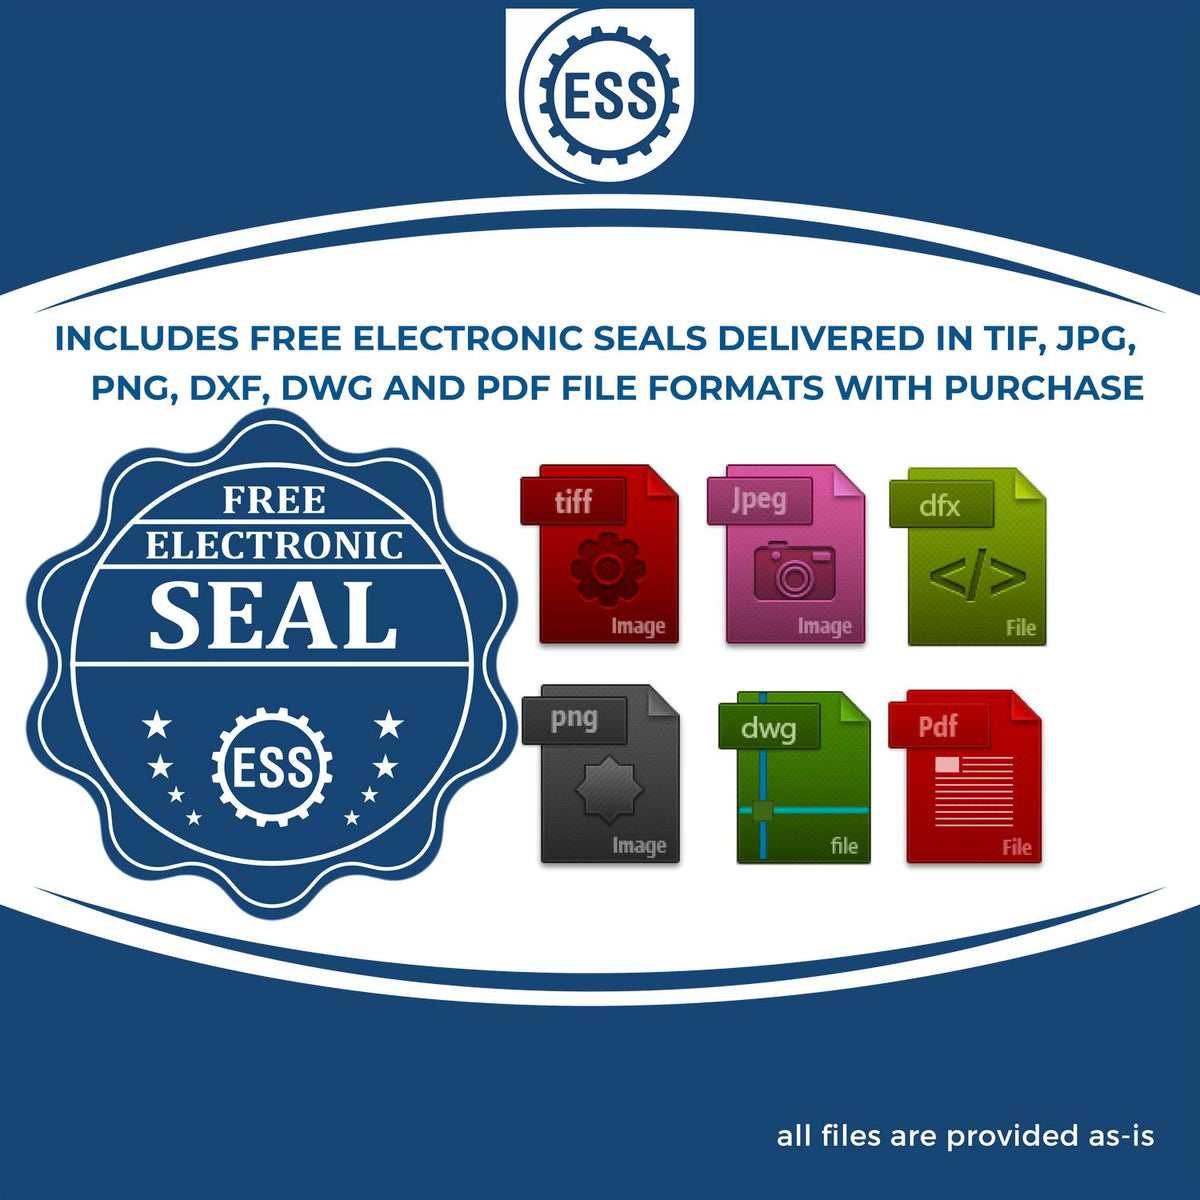 An infographic for the free electronic seal for the Self-Inking Nebraska PE Stamp illustrating the different file type icons such as DXF, DWG, TIF, JPG and PNG.